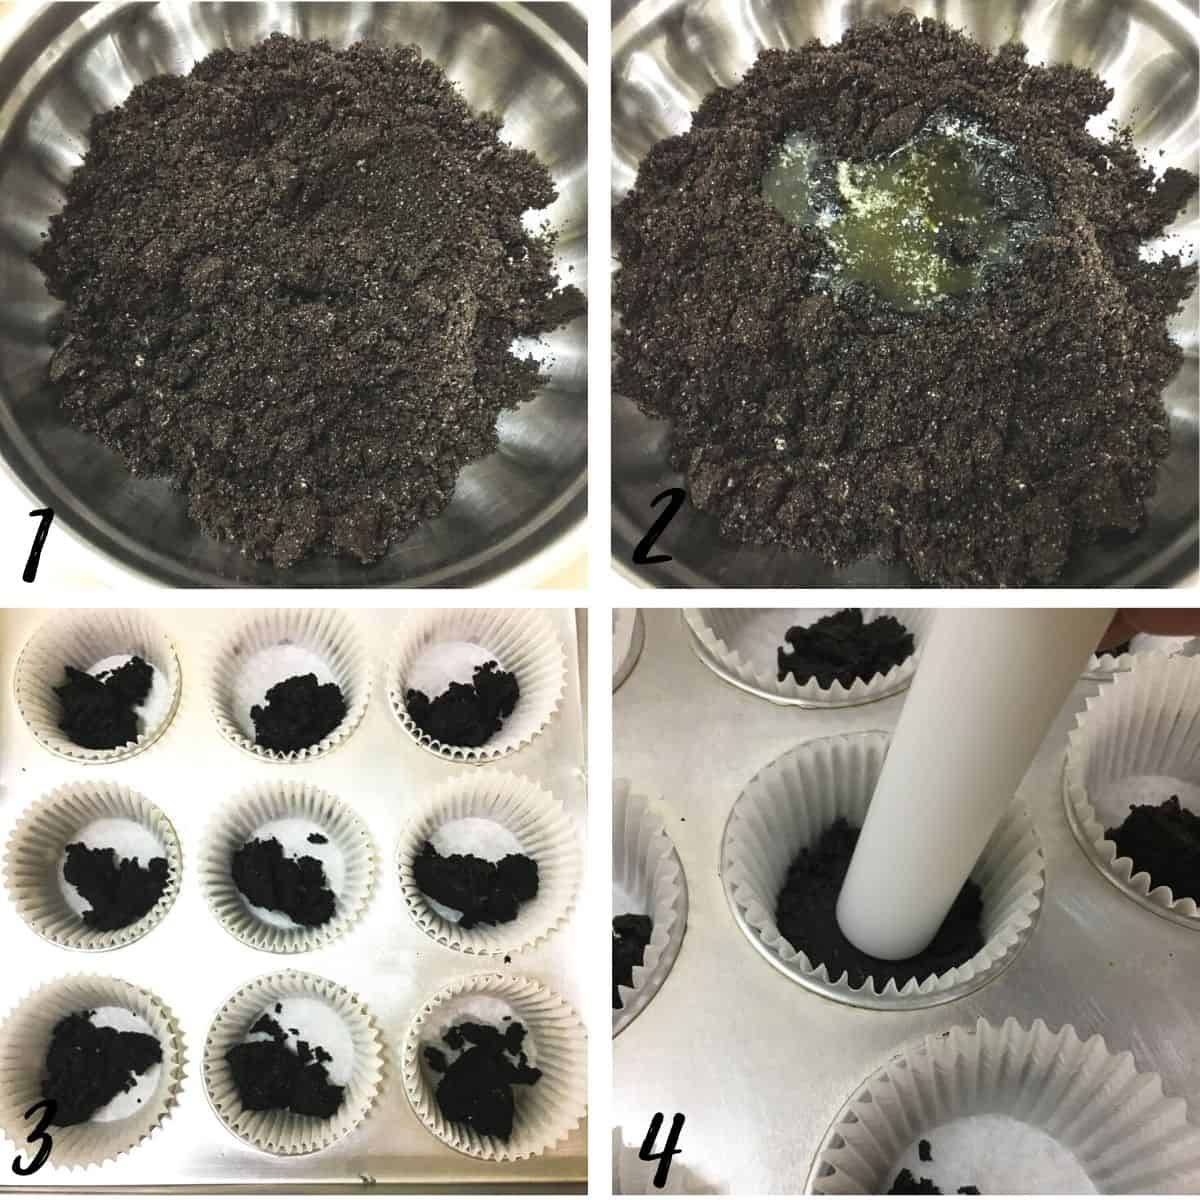 A poster of 4 images showing how to make Oreo crust in cupcake casings